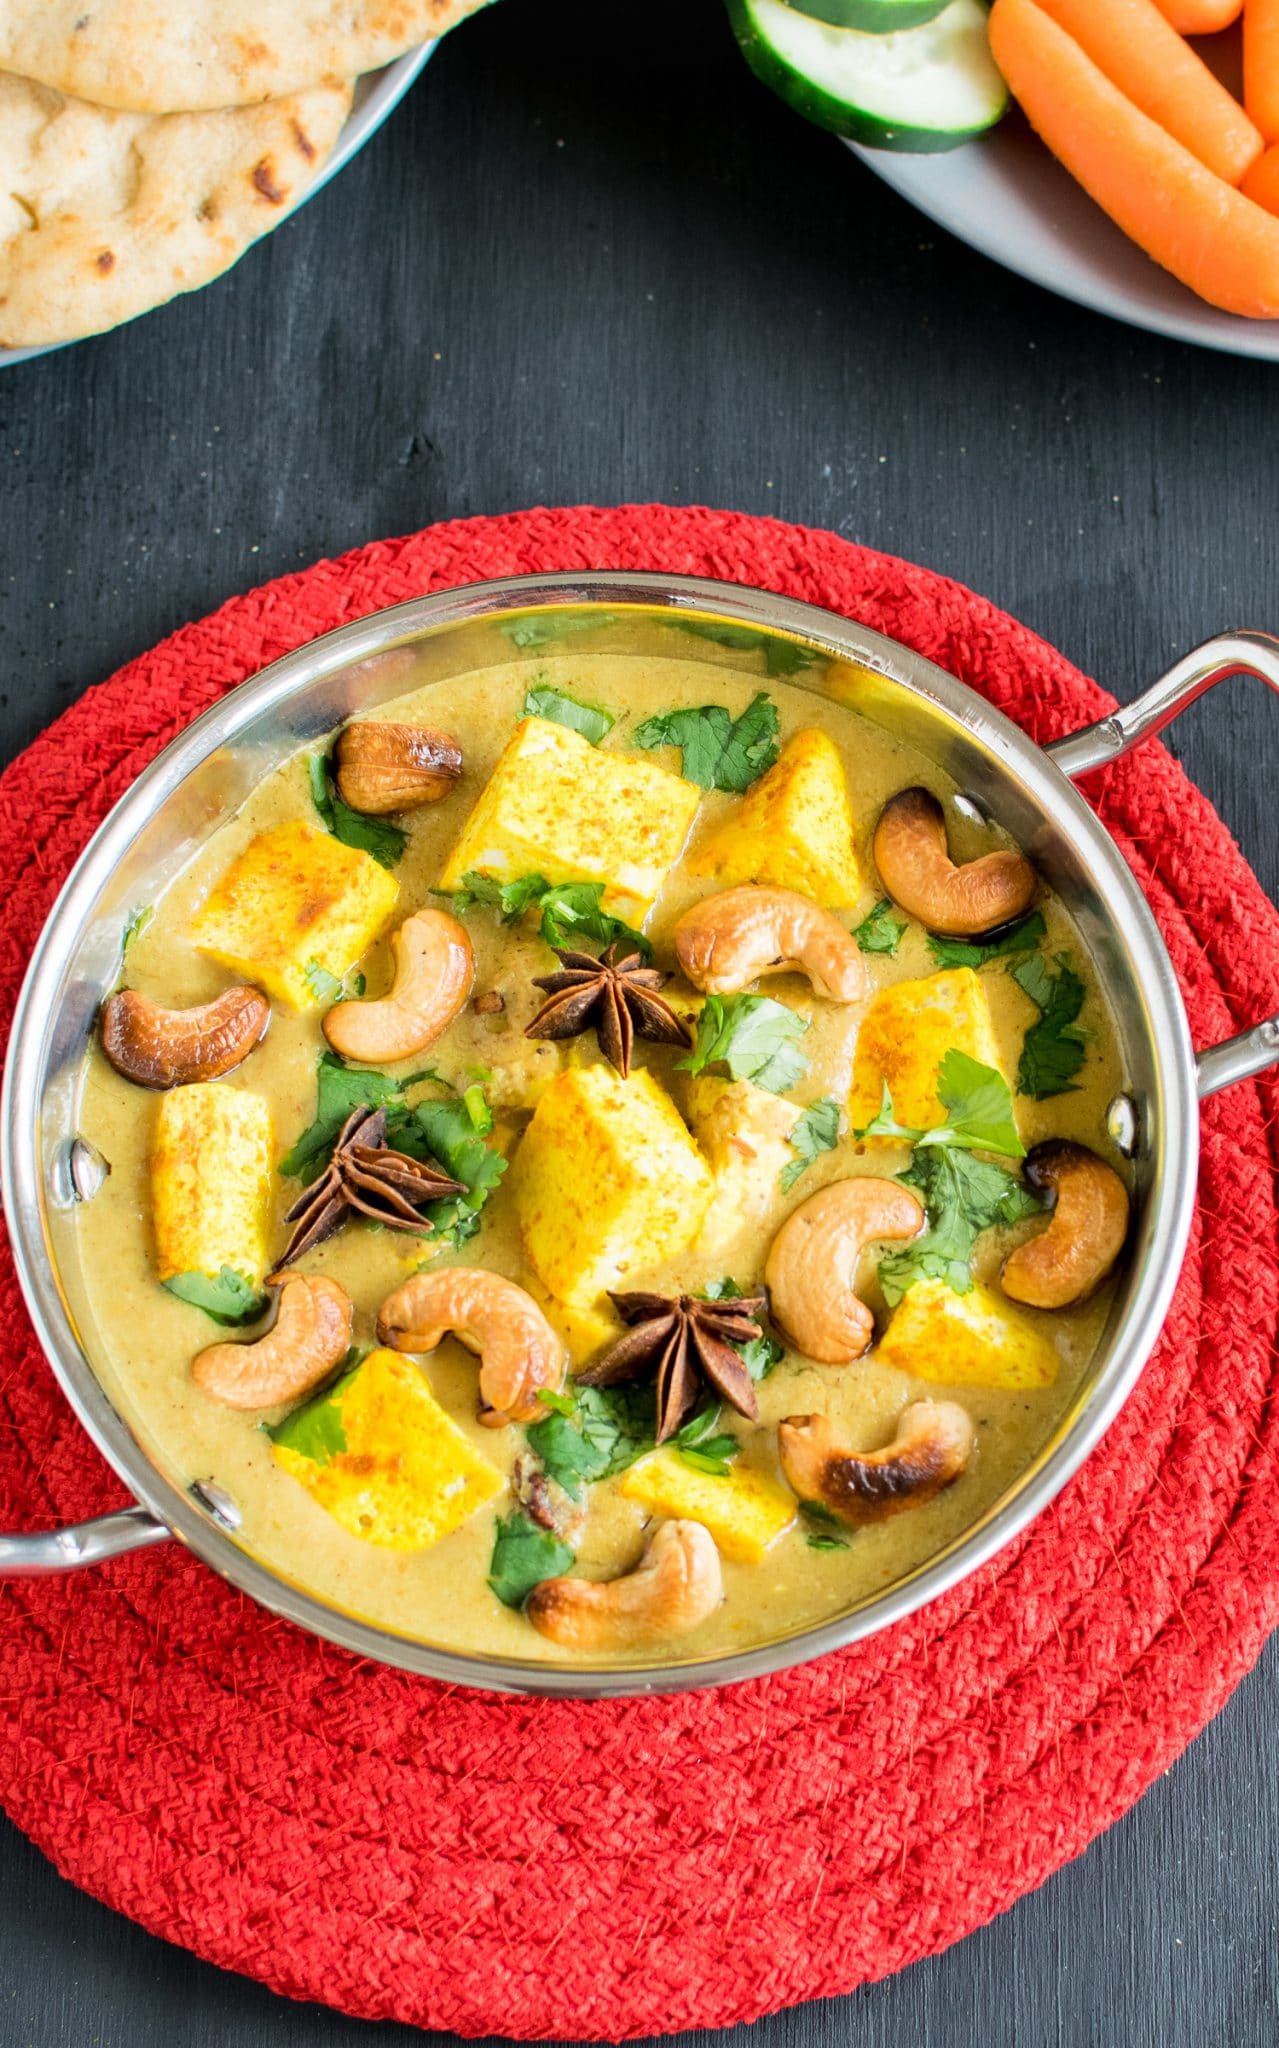 A top view of Turmeric Tofu Cashew Curry is shown